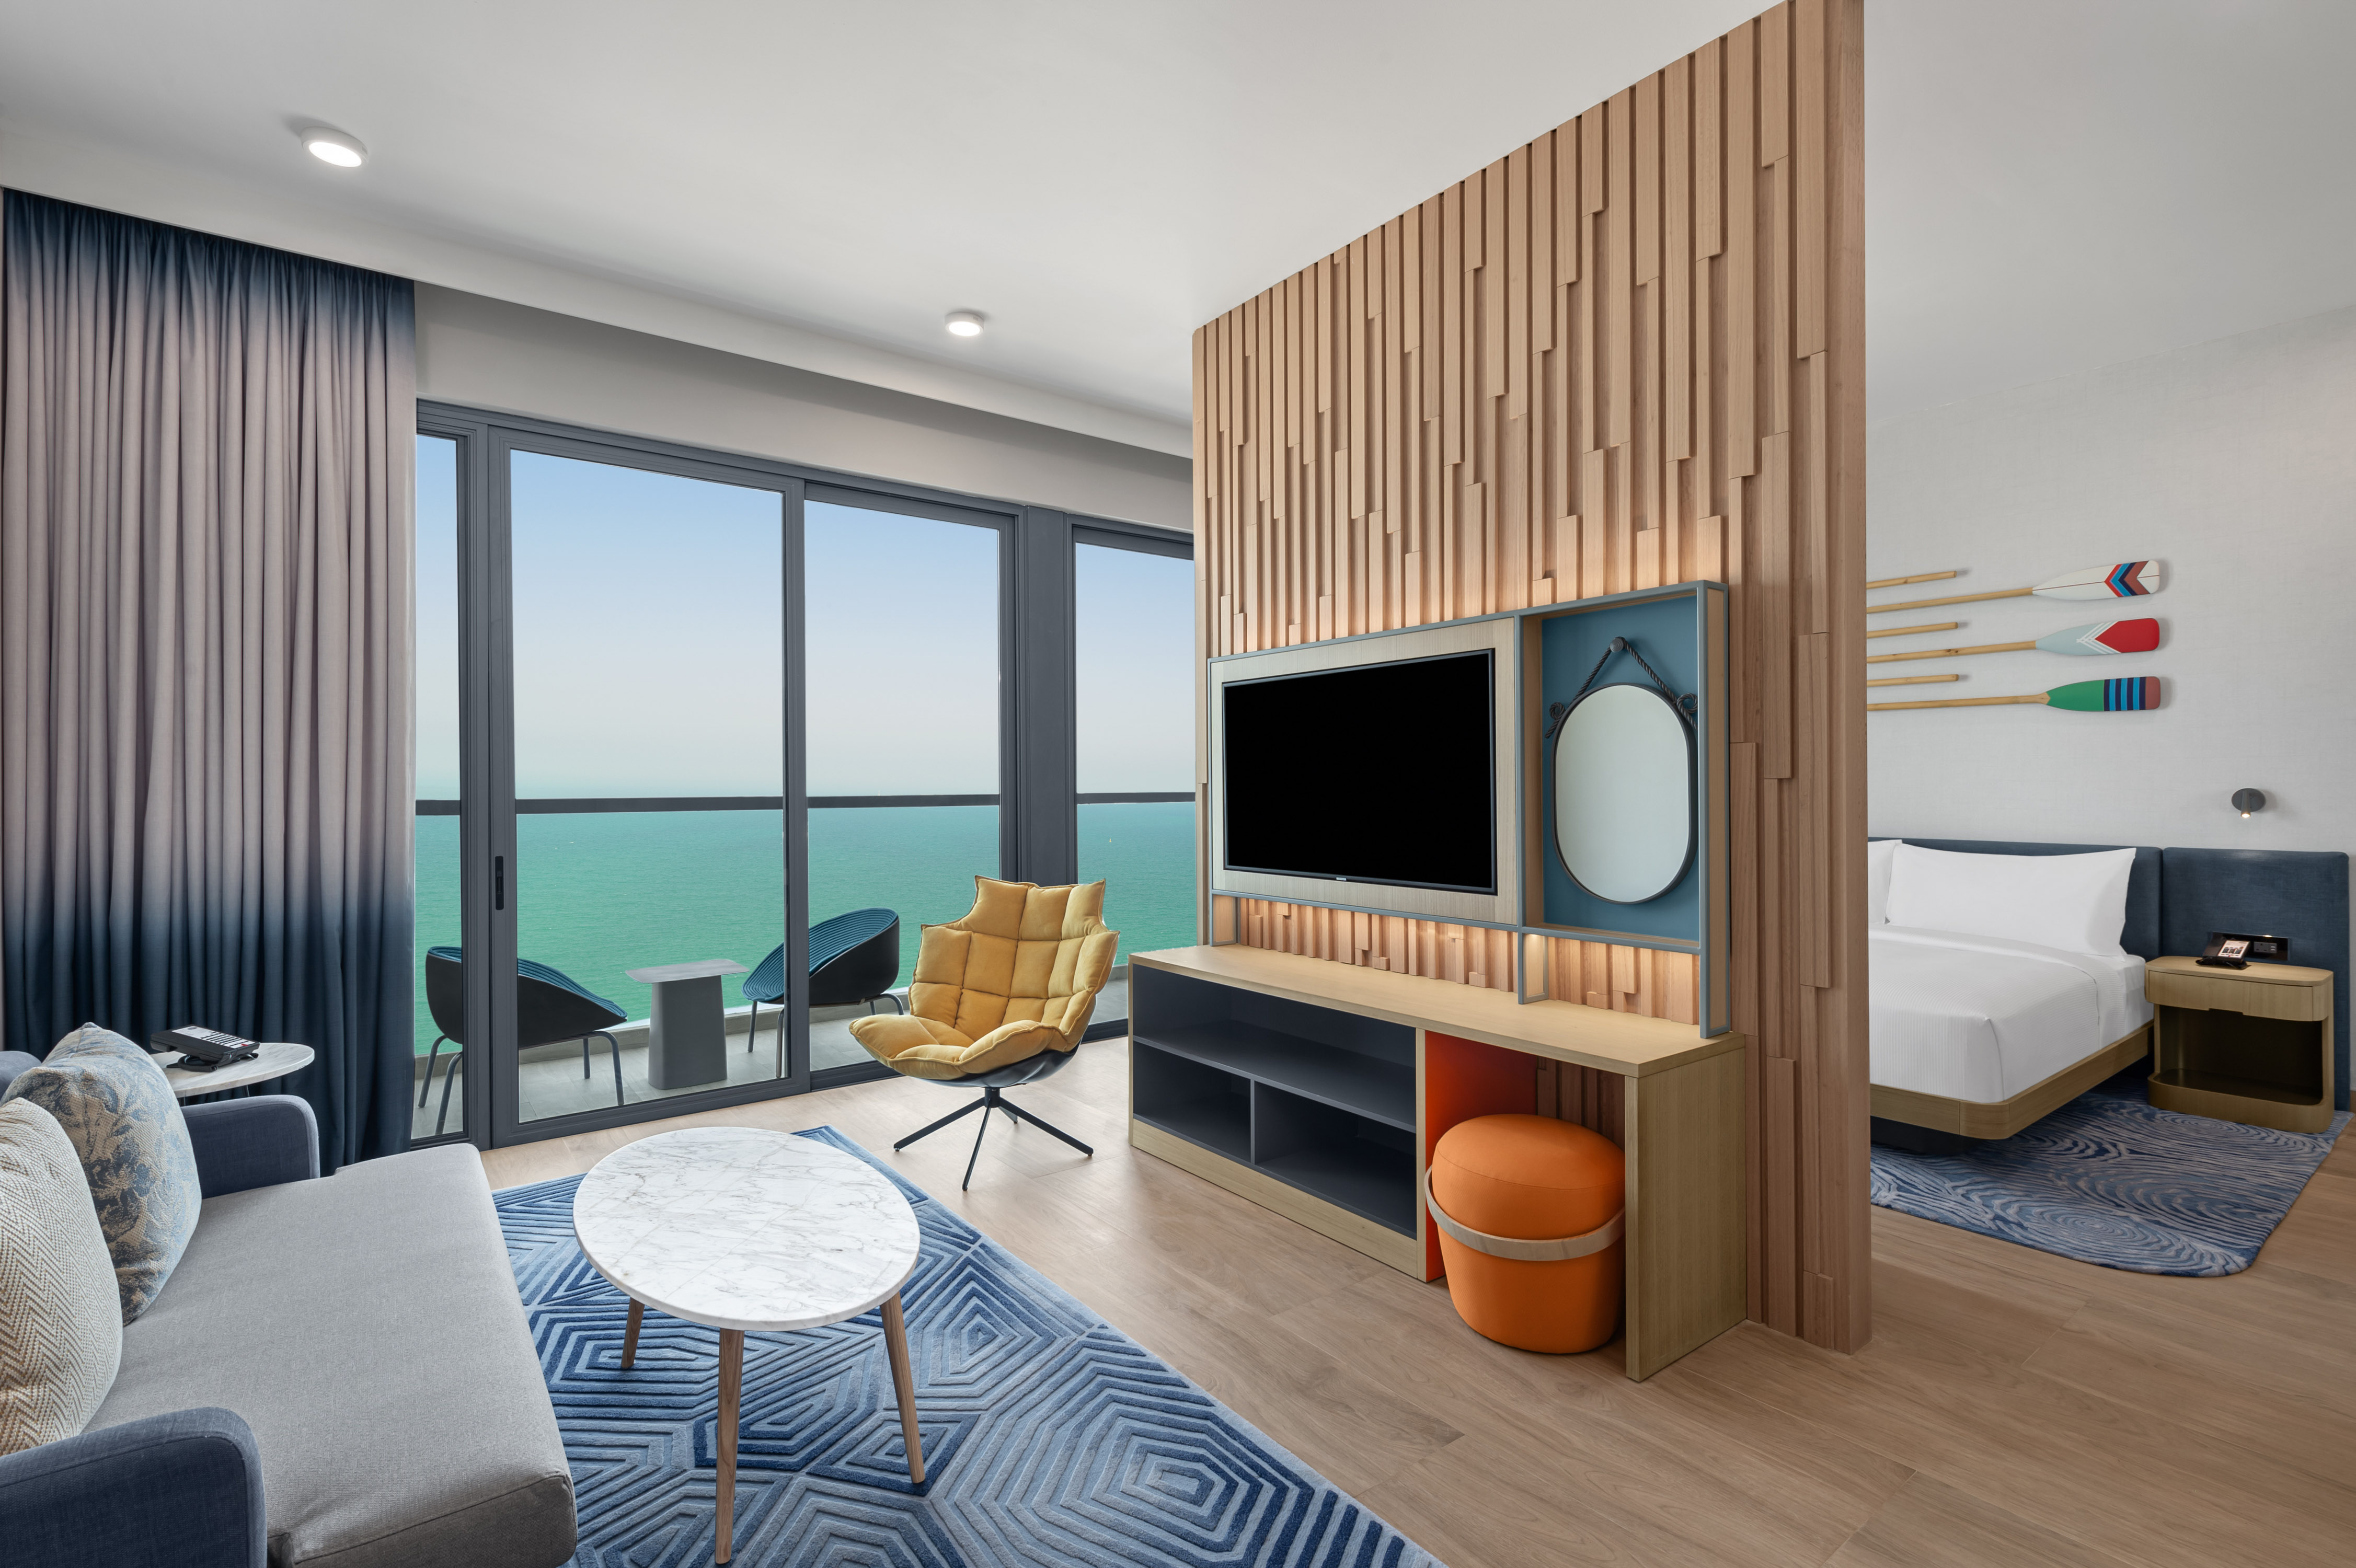 King Guest Room and Living Area with Sea View